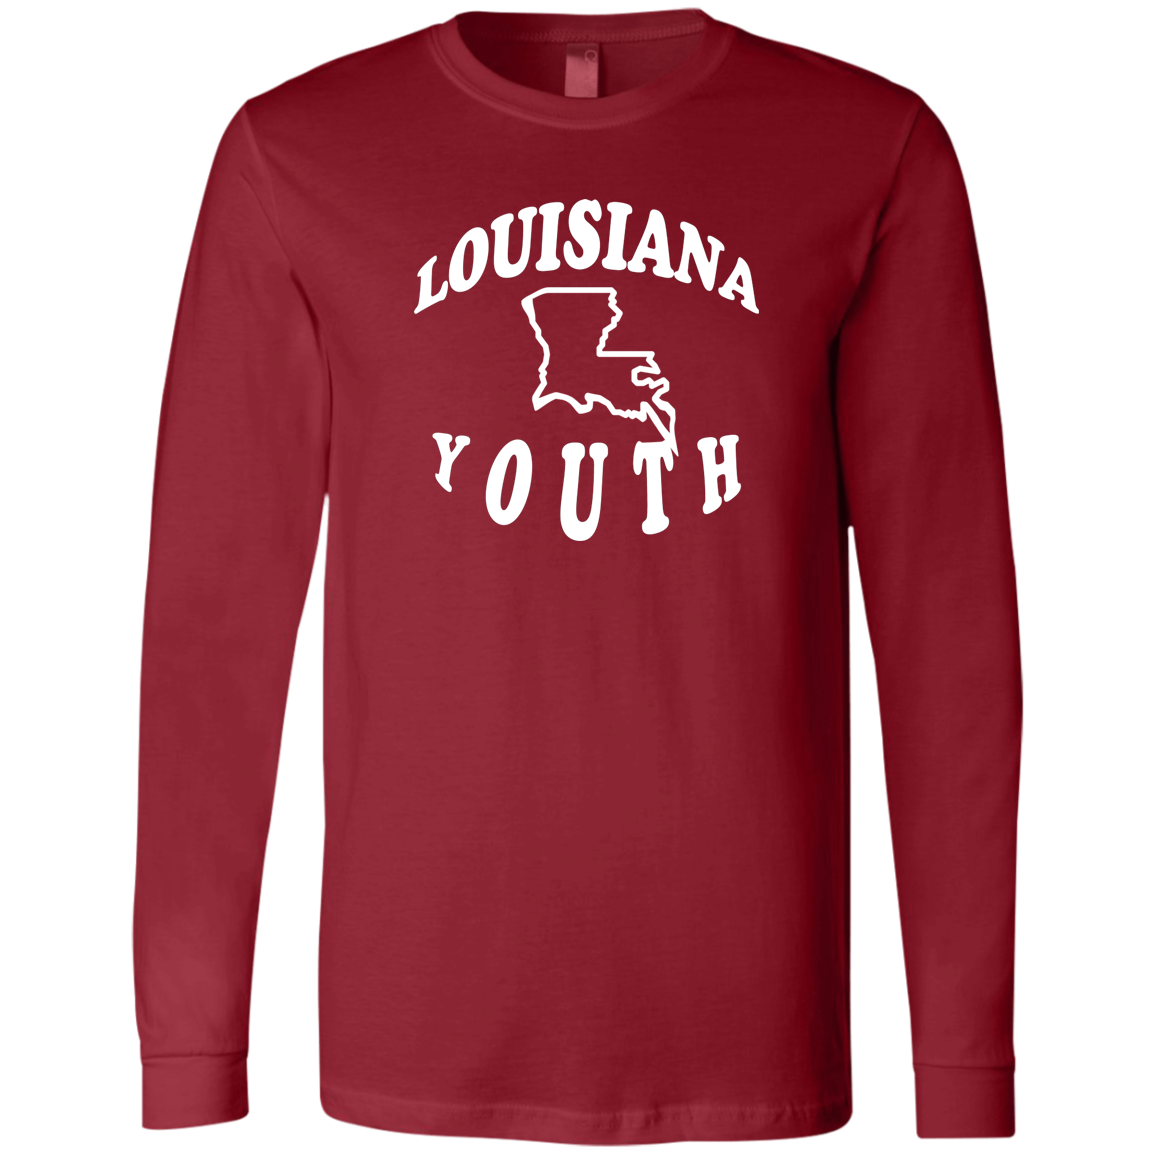 LA State - T-Shirts - Long Sleeve and Short Sleeve